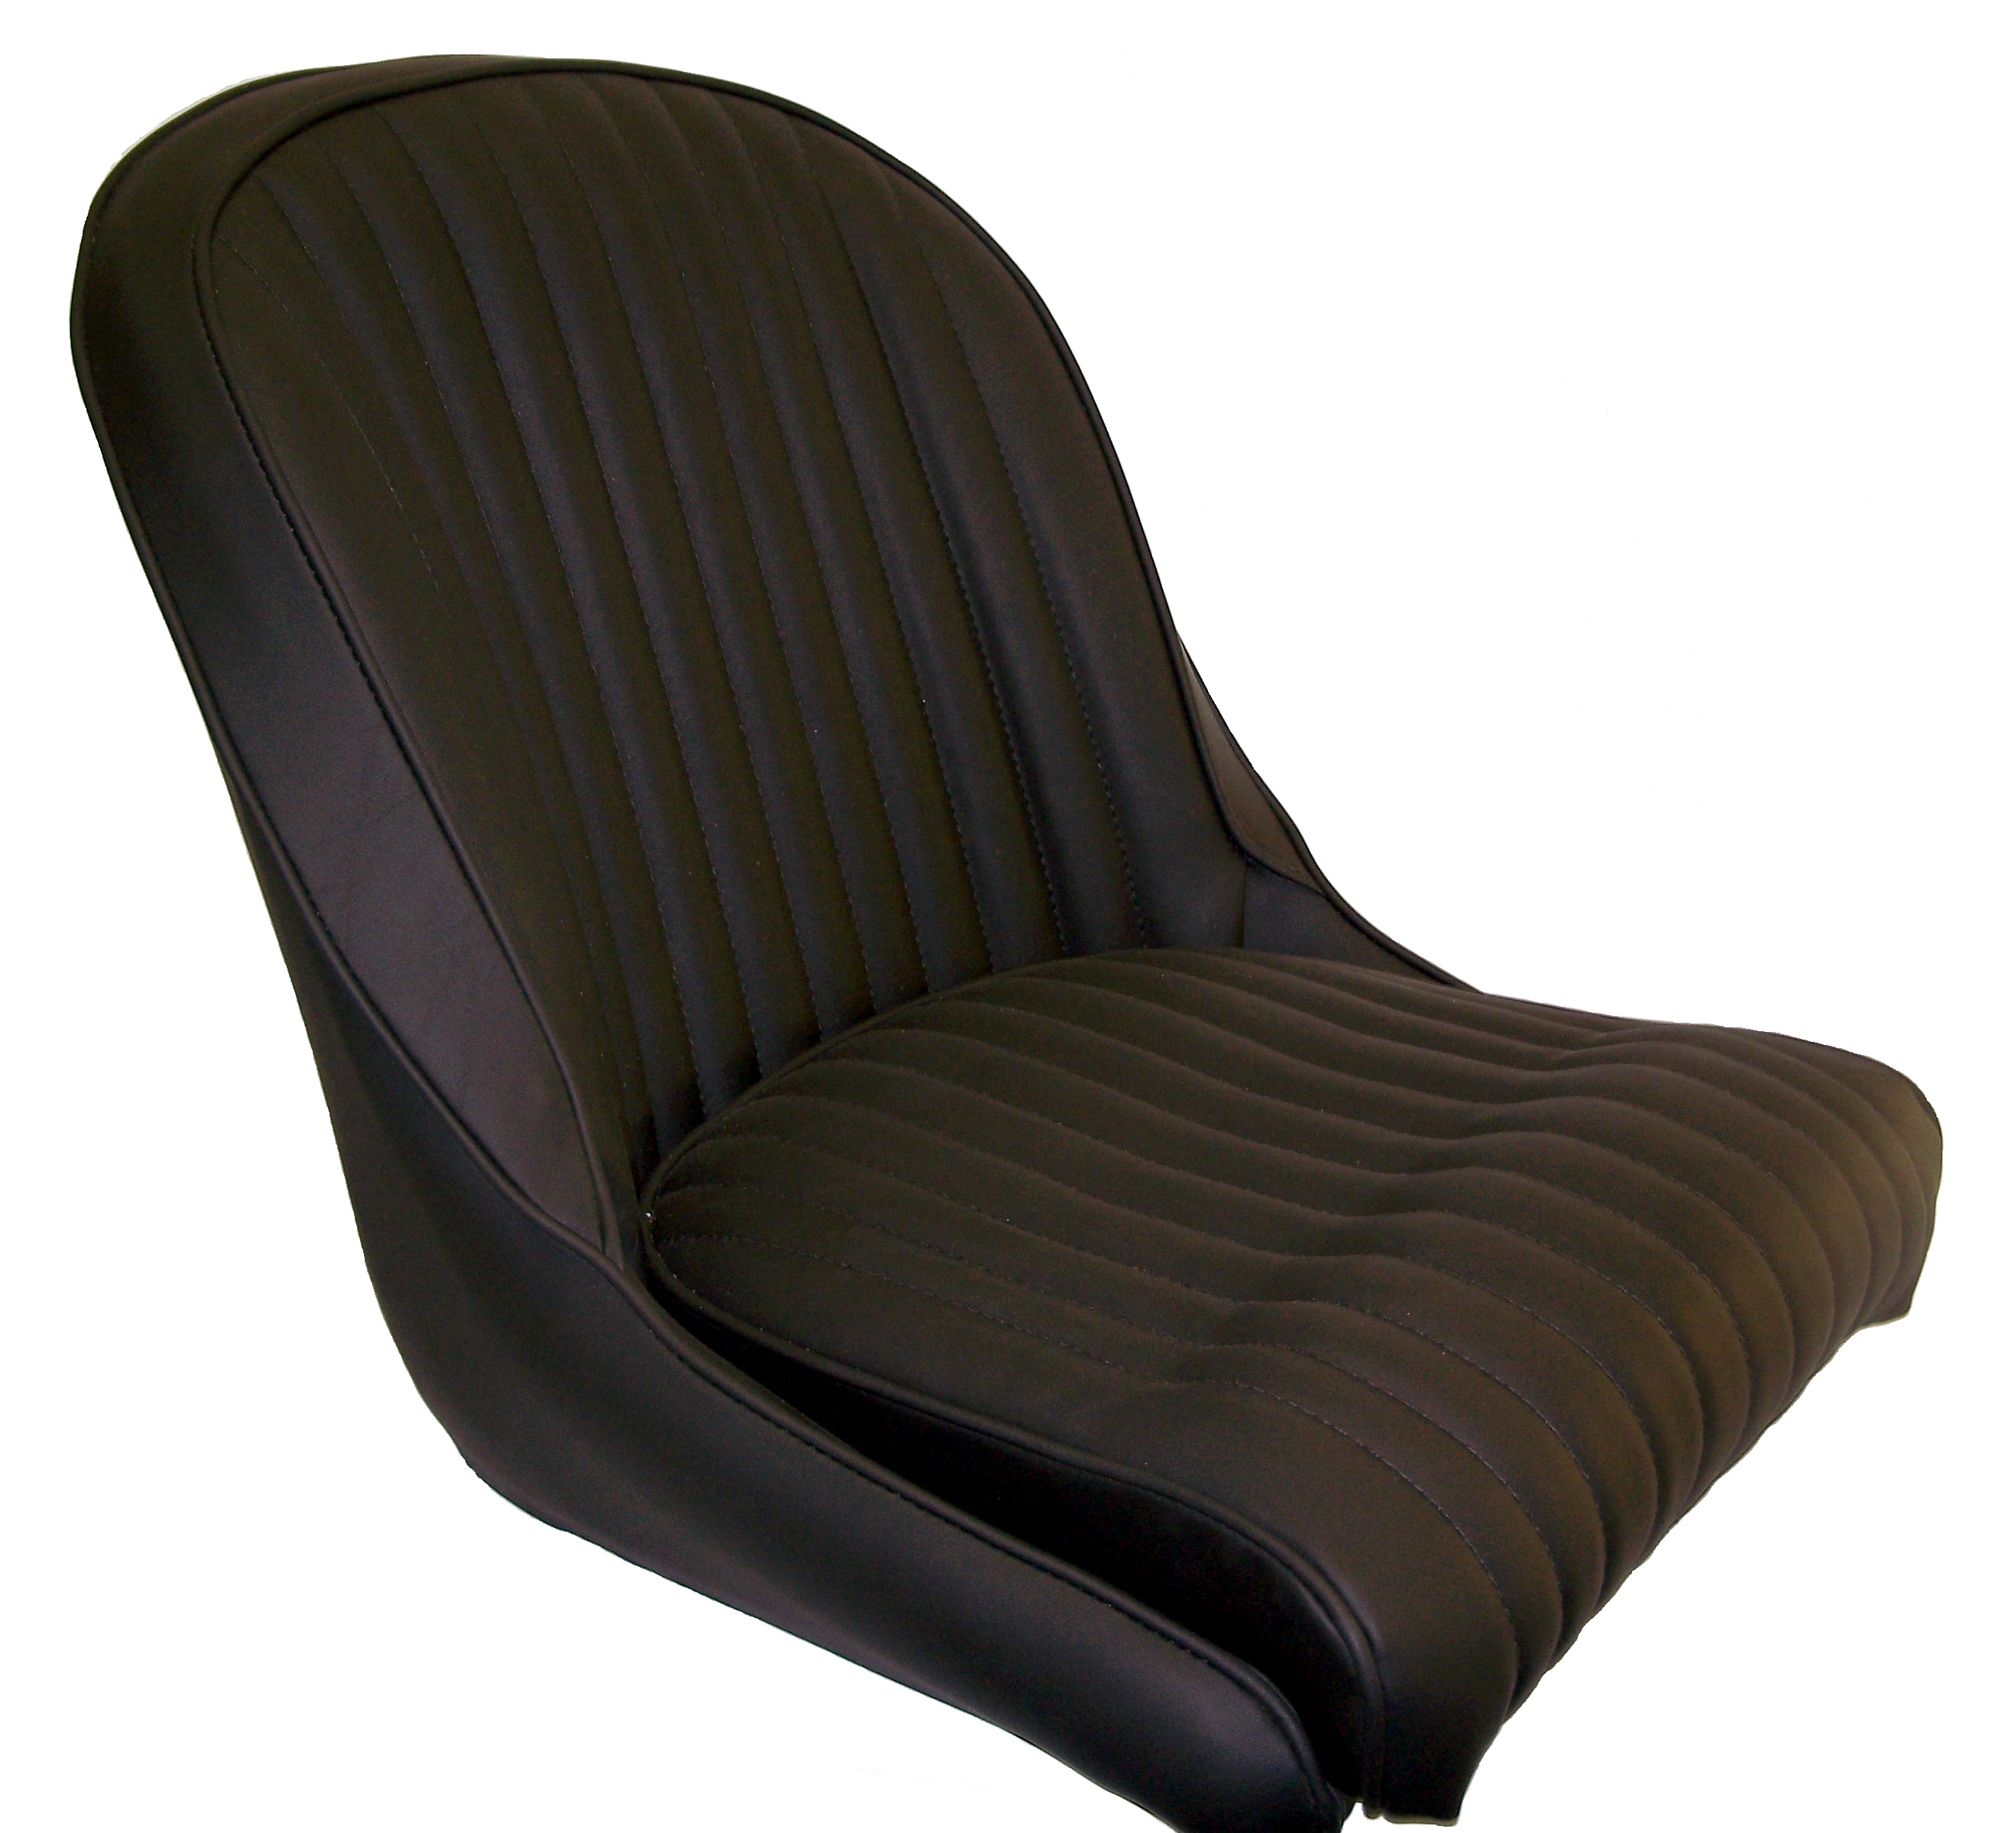 seat upholstered leather sold as a pair